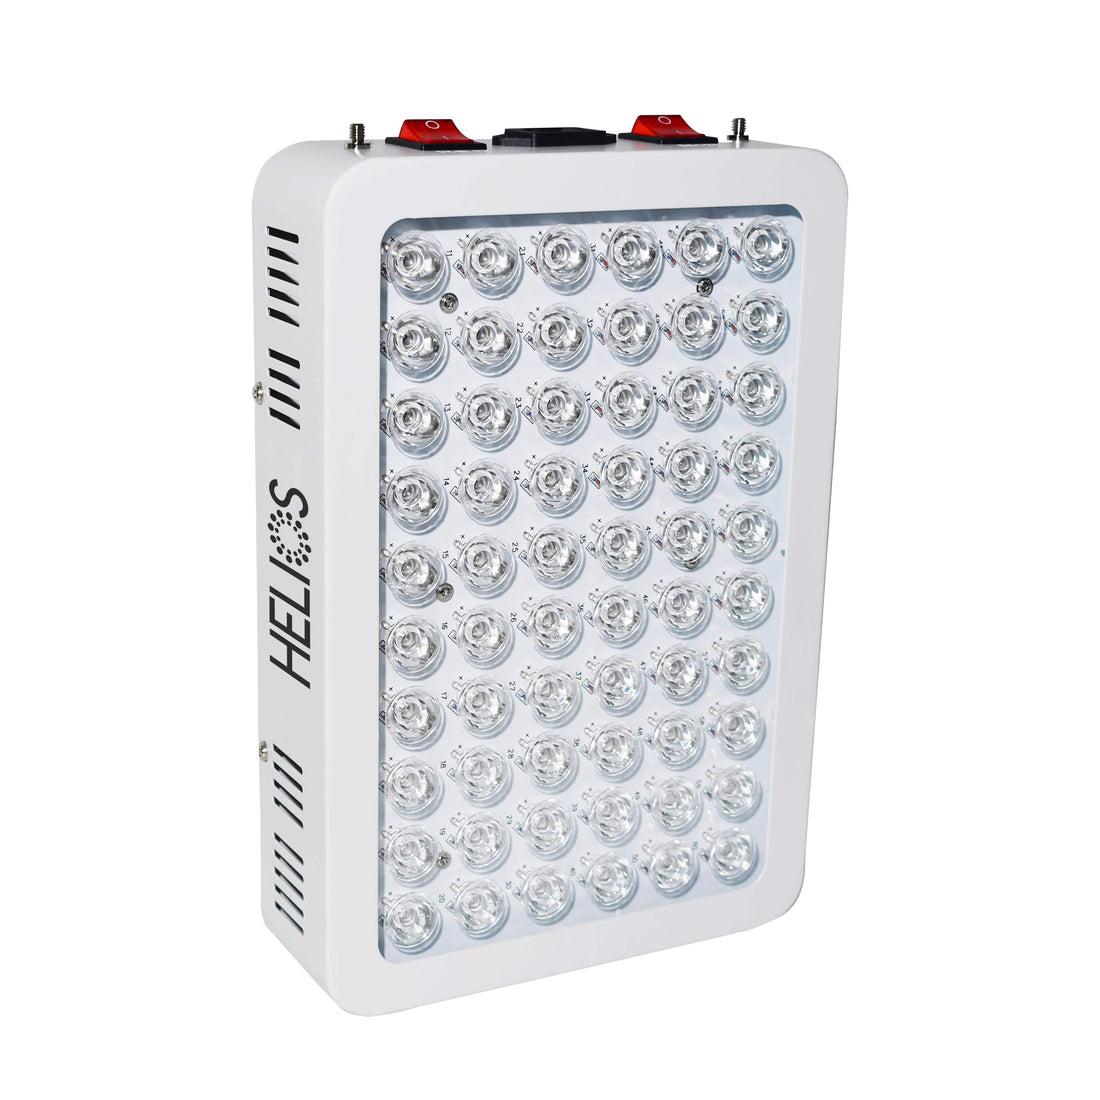 Helios 1 Series - 300w Targeted Red Light Therapy Device